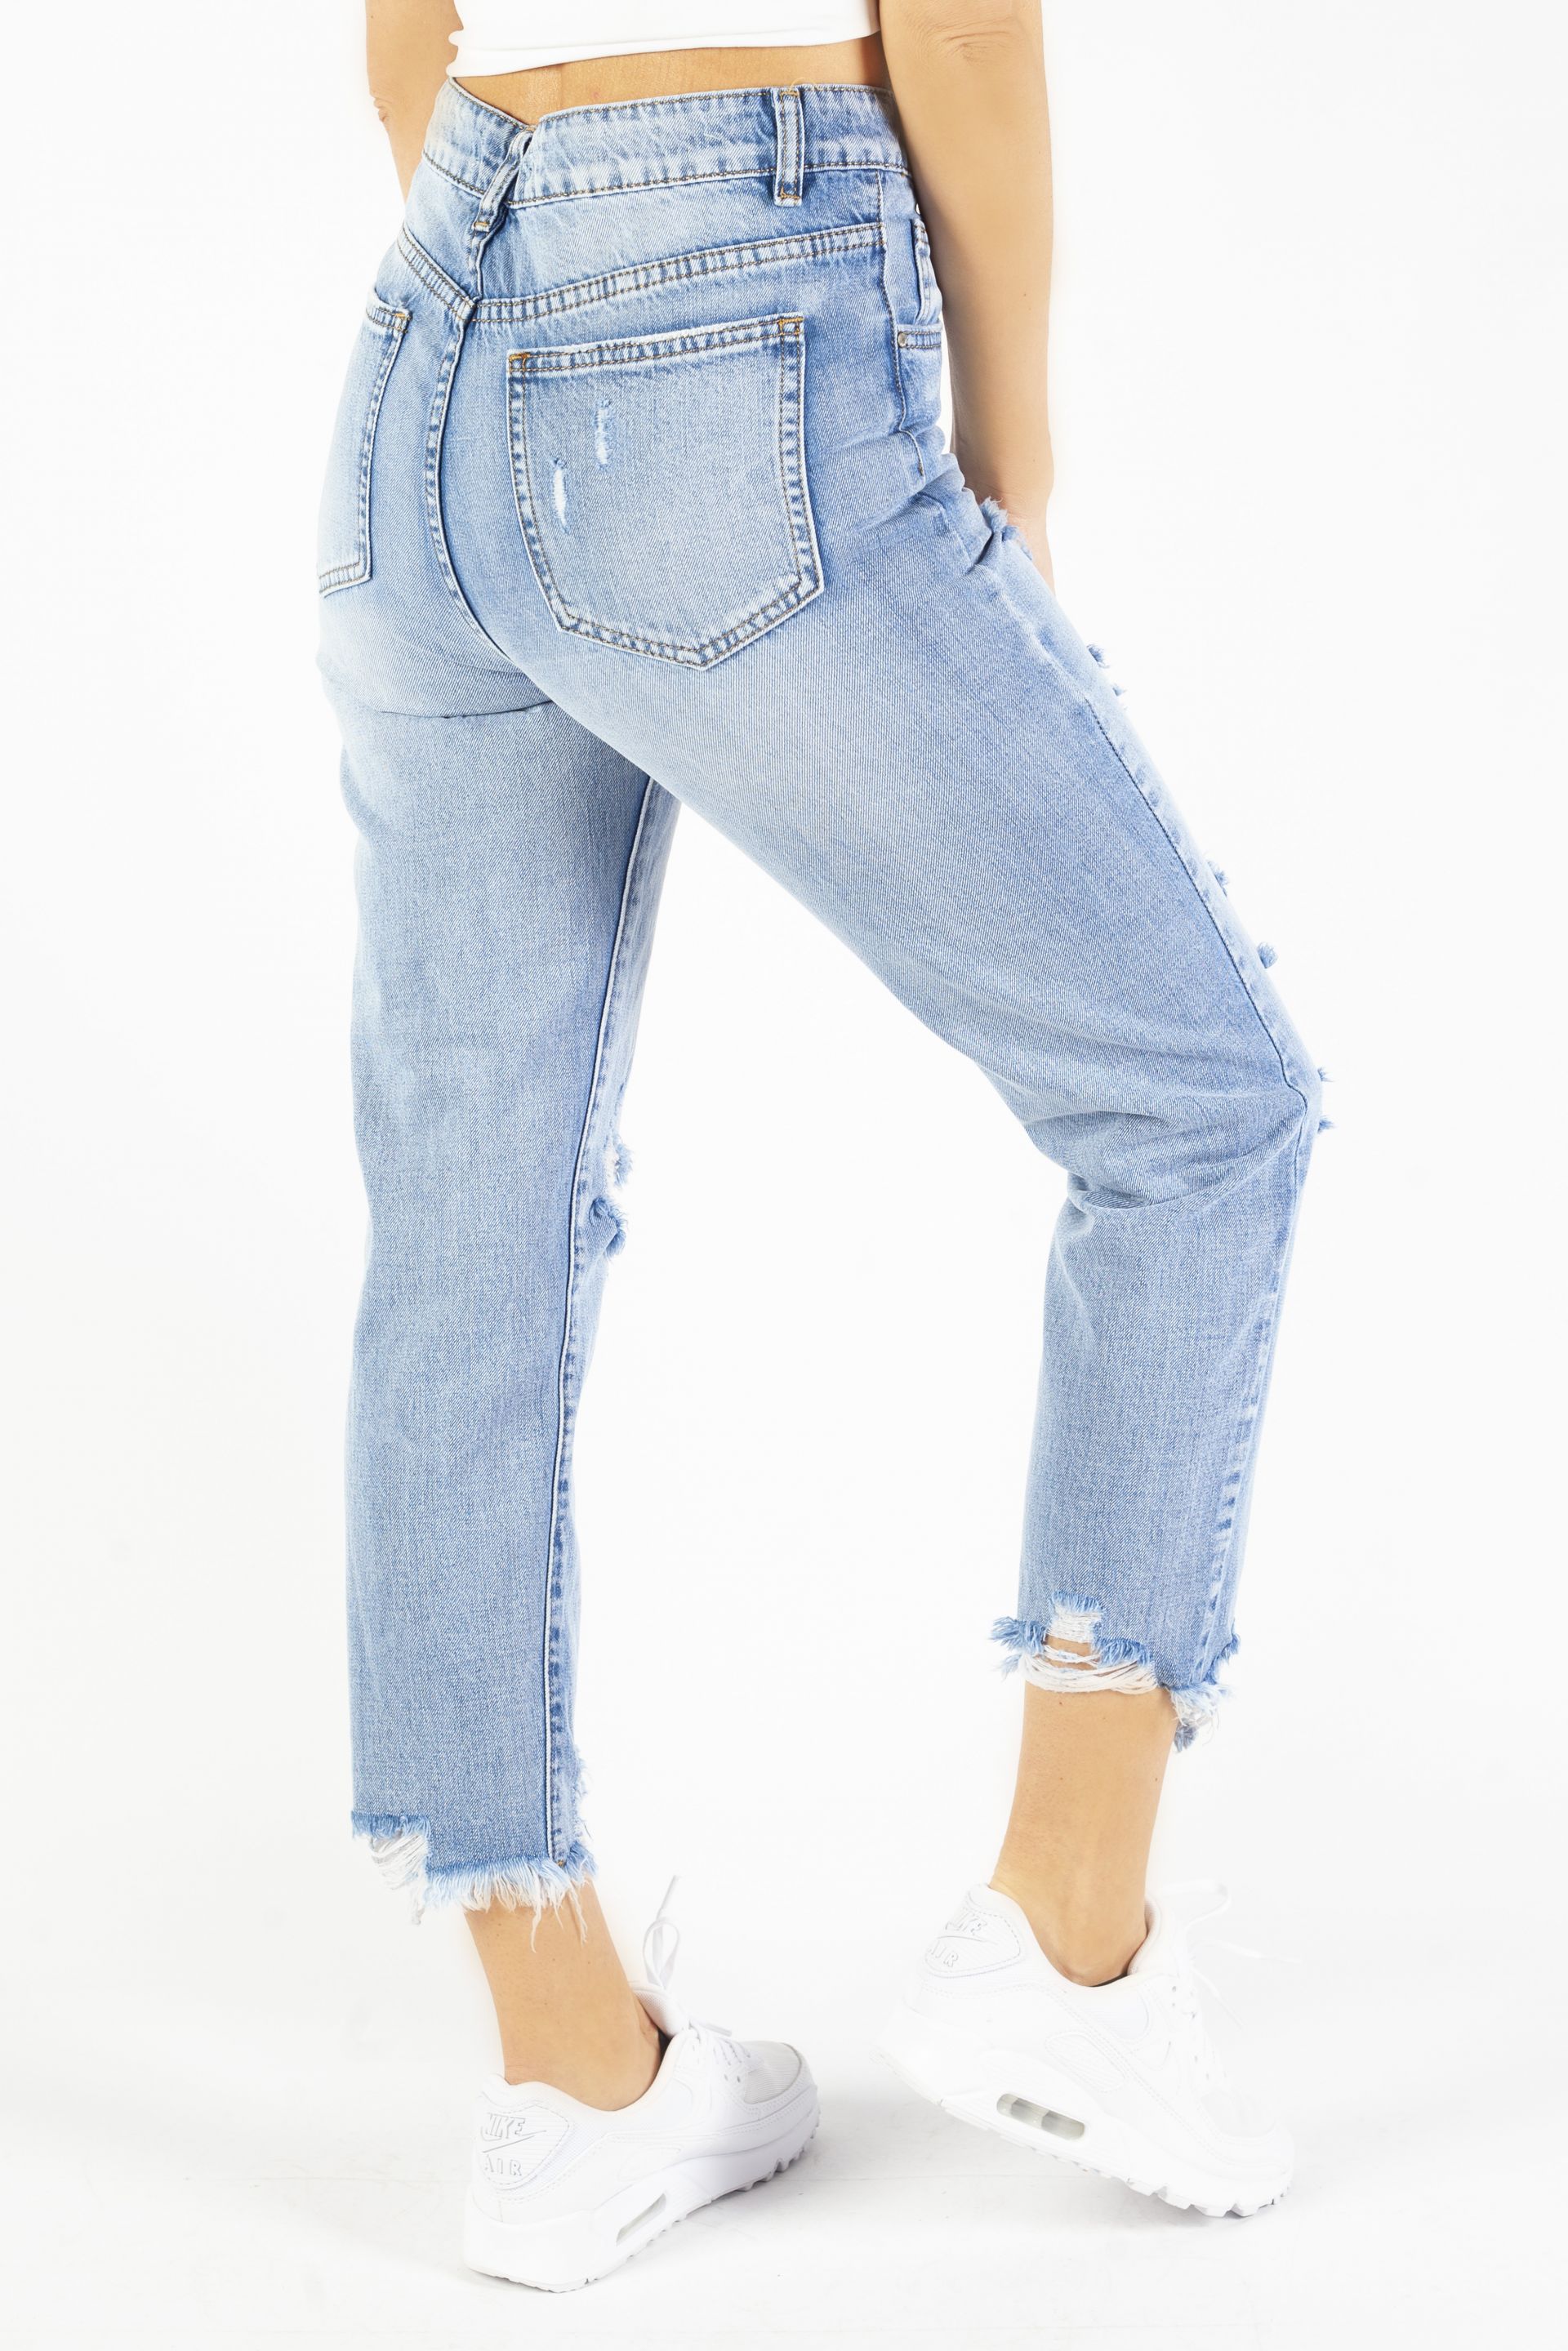 Jeans VS MISS CH6220